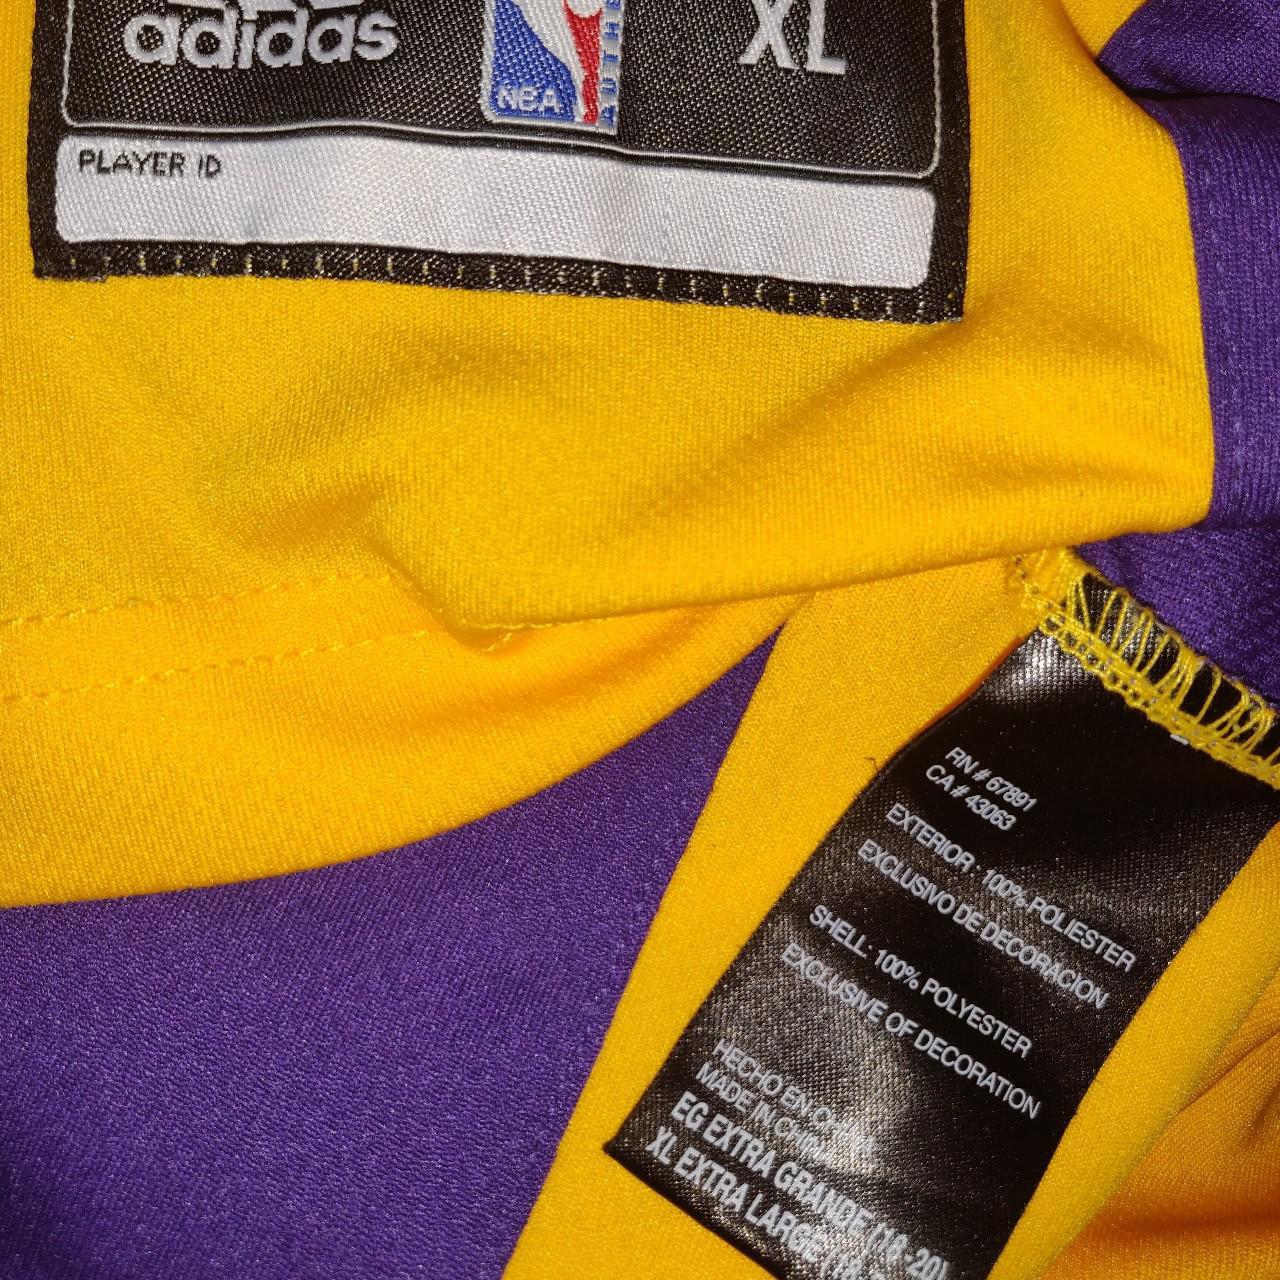 Dual colored Kobe jersey from the 2002 finals. Super - Depop